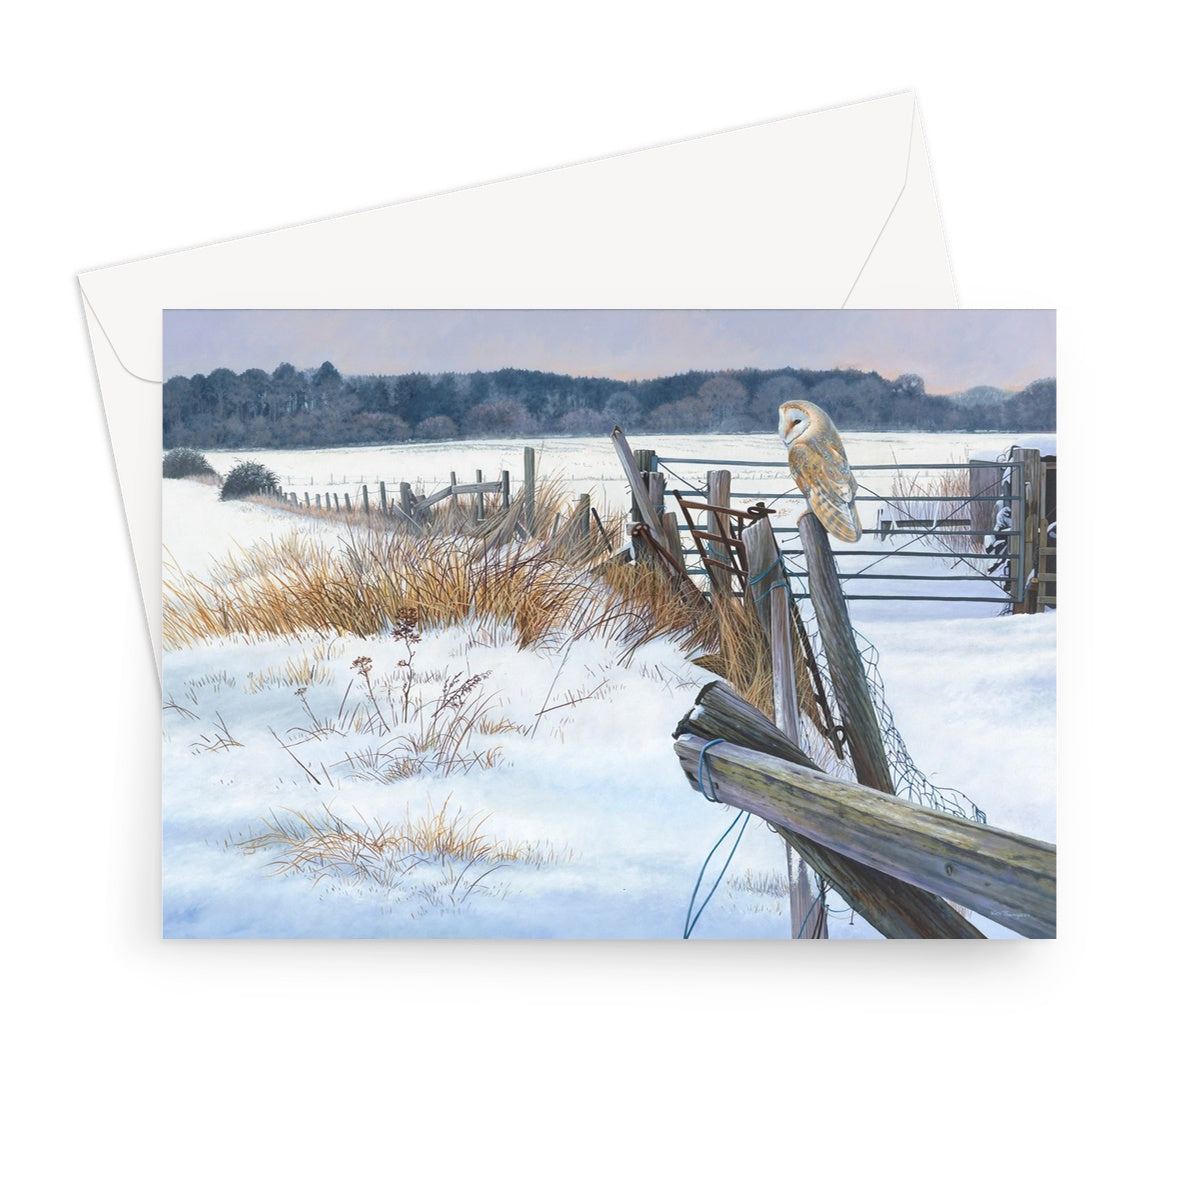 The Broken Fence Greeting Card